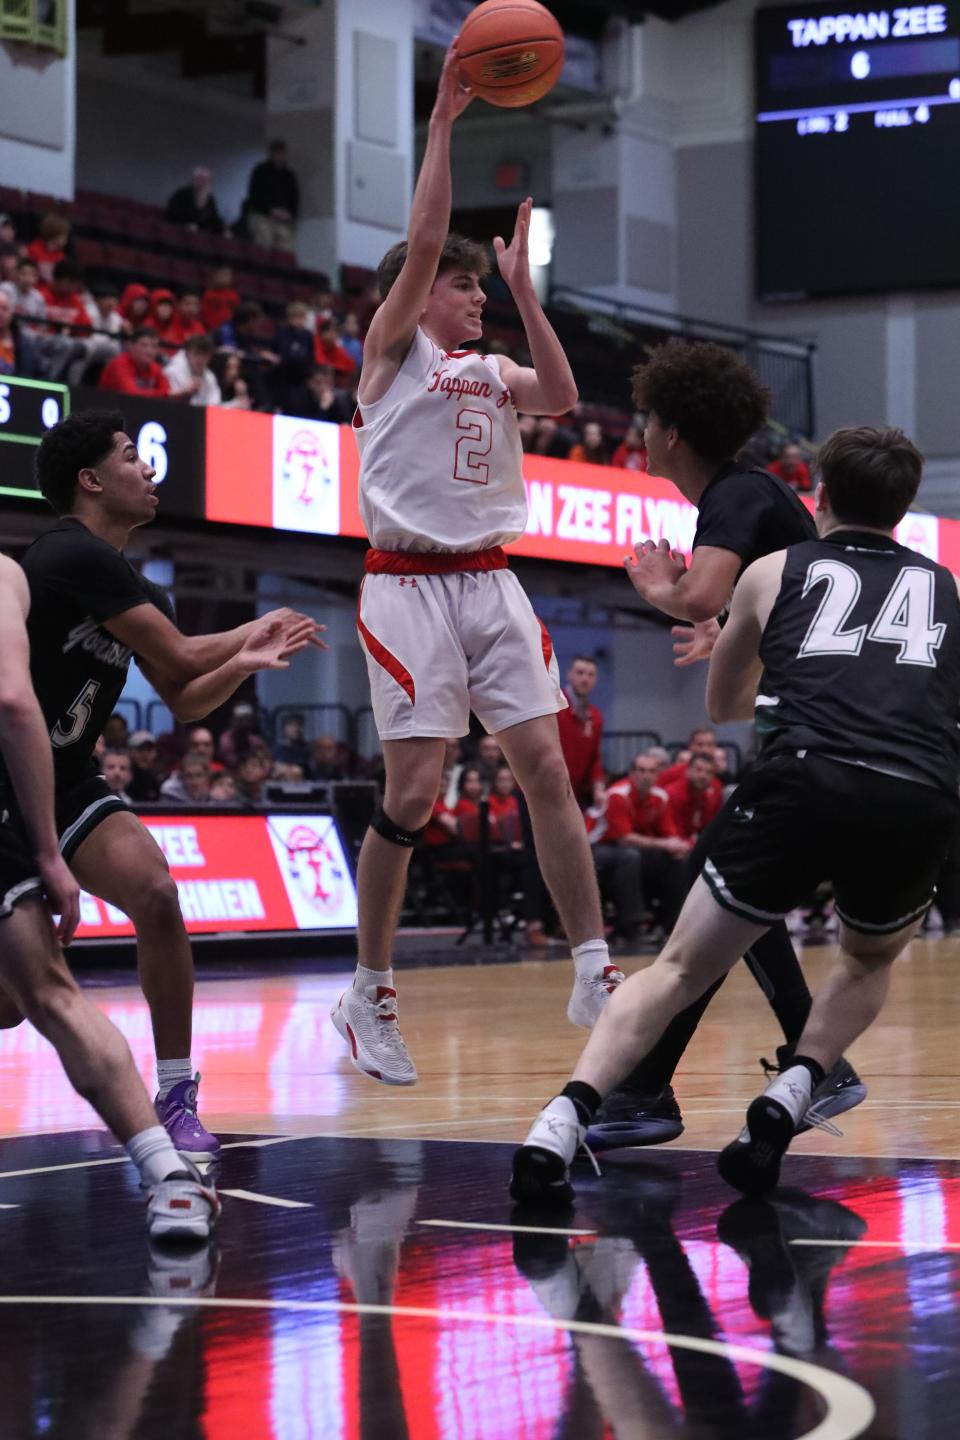 Tommy Linehan dropped five 3s before halftime, helping Tappan Zee beat Yorktown 54-50 in a Class A semifinal at the Westchester County Center Mar. 2, 2023.